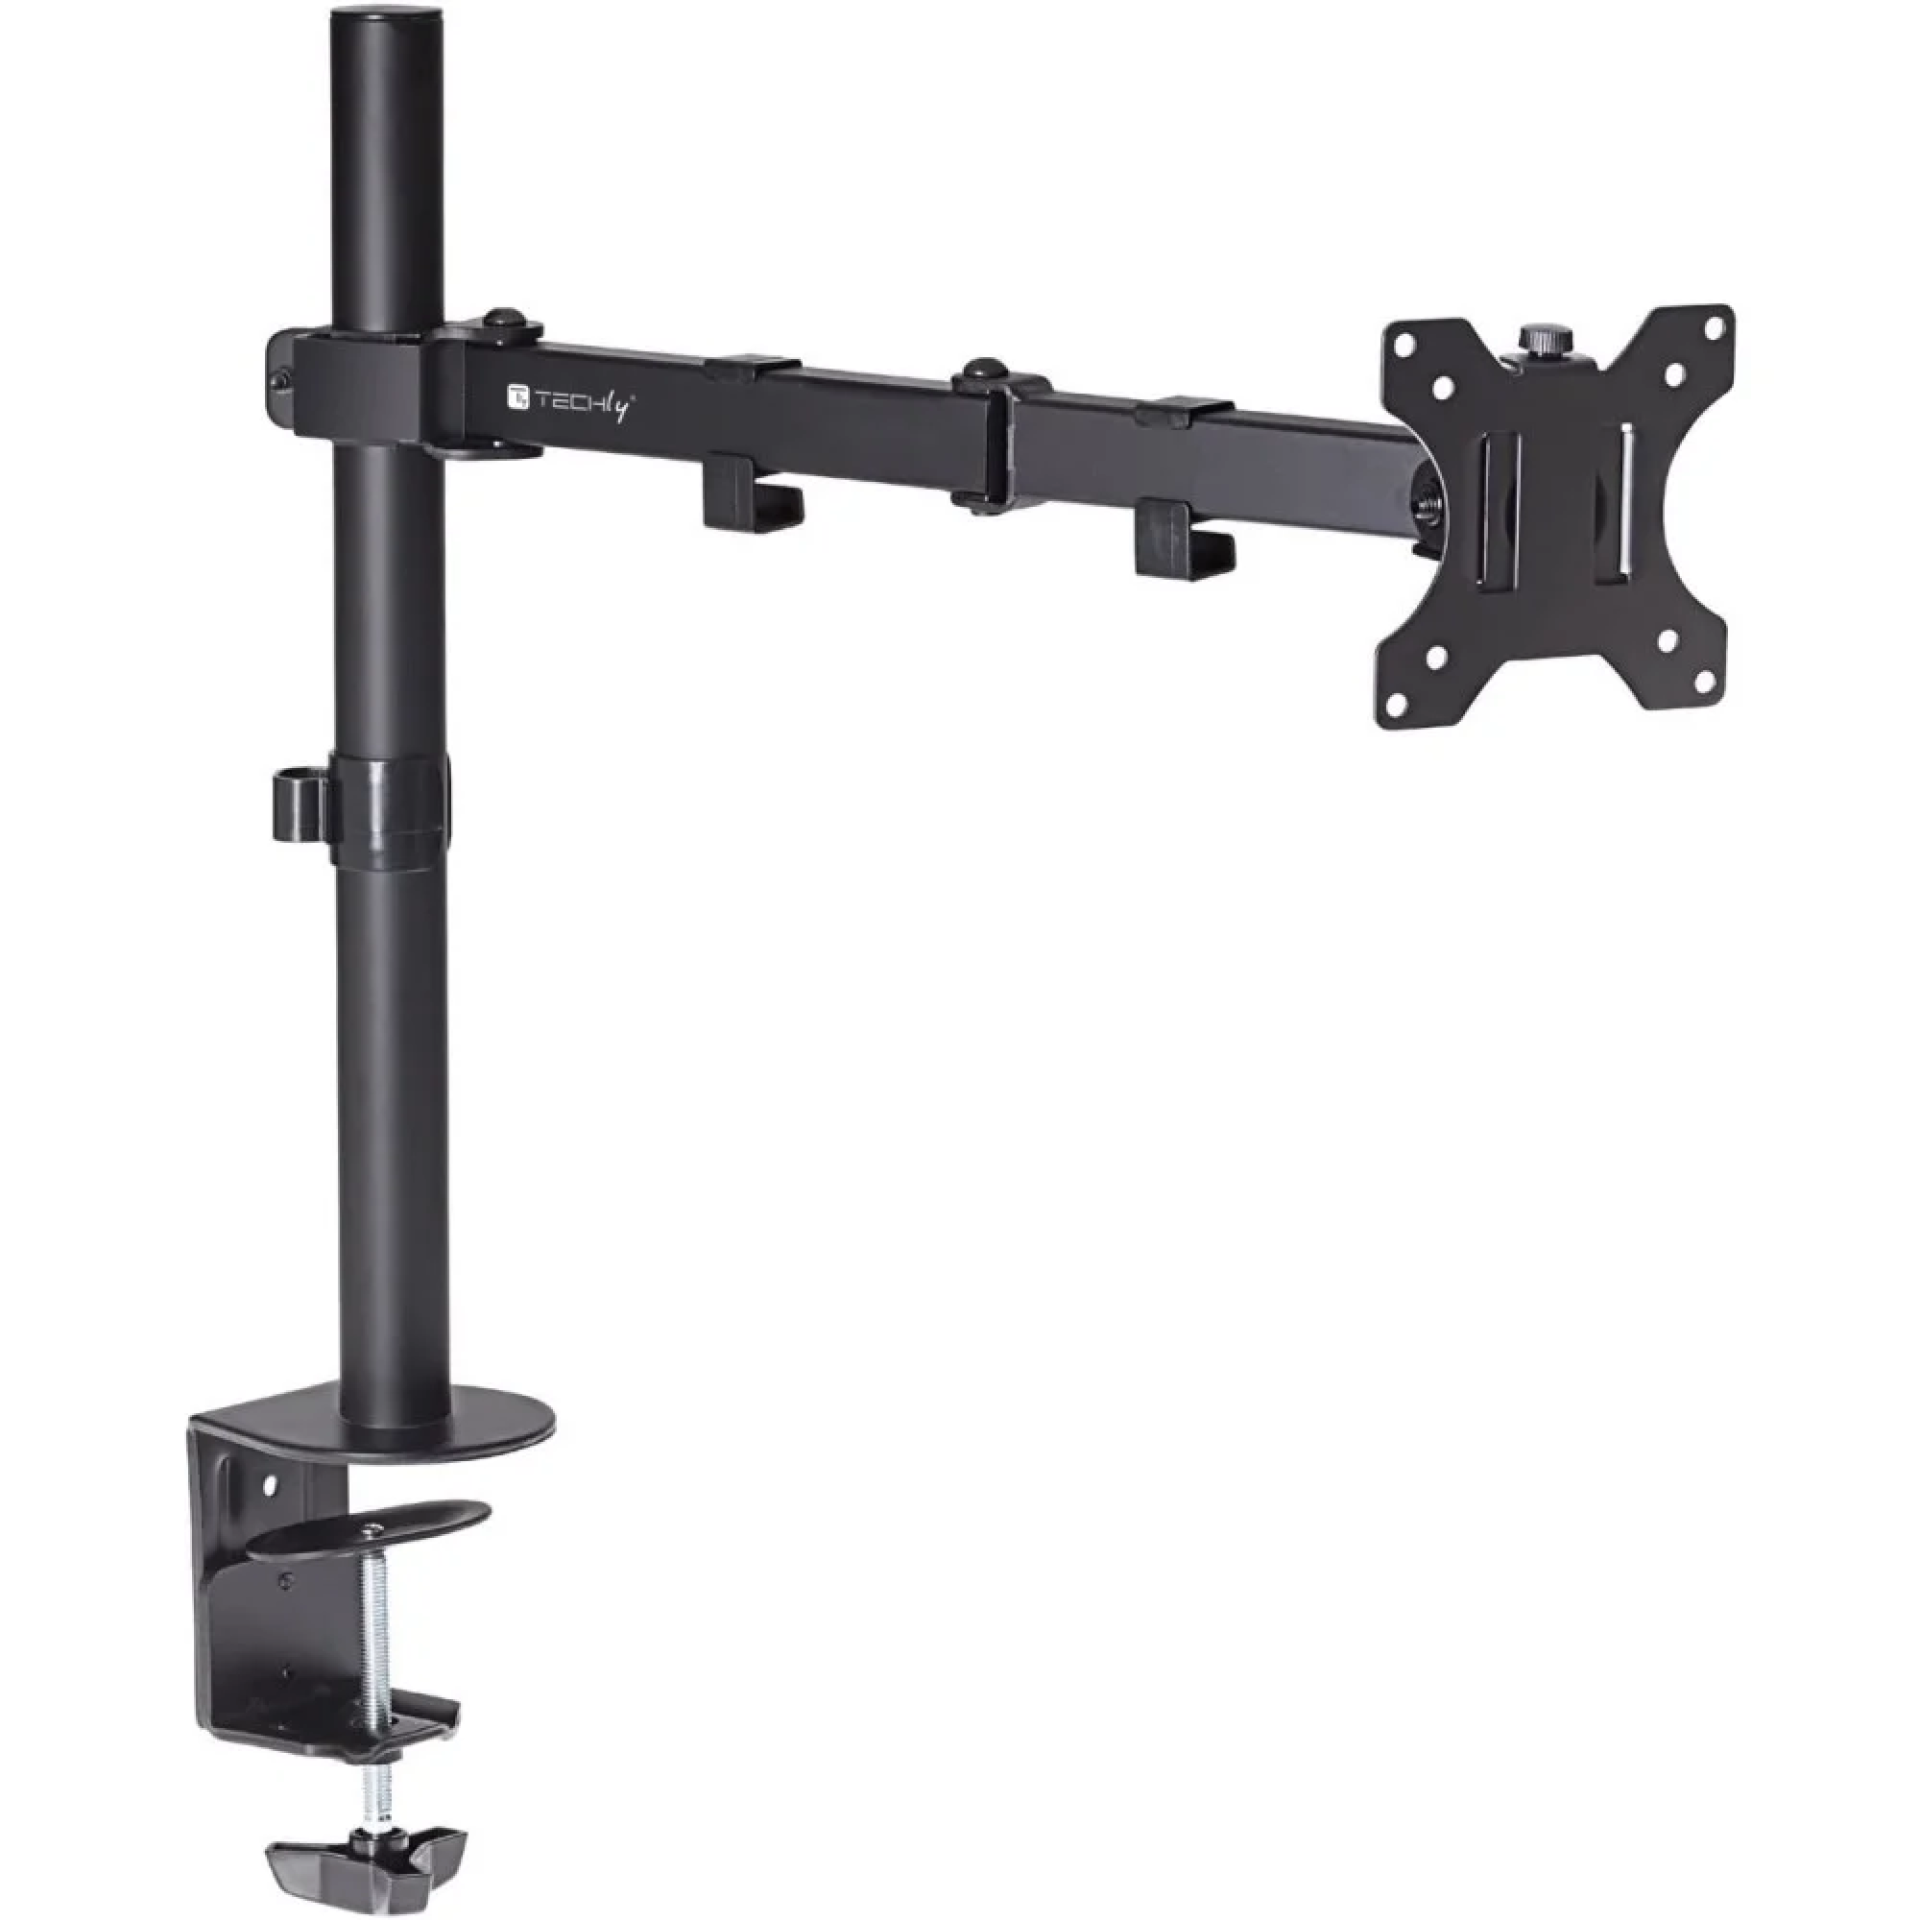 Techly desk support for monitor 13-27" double adjustment joint